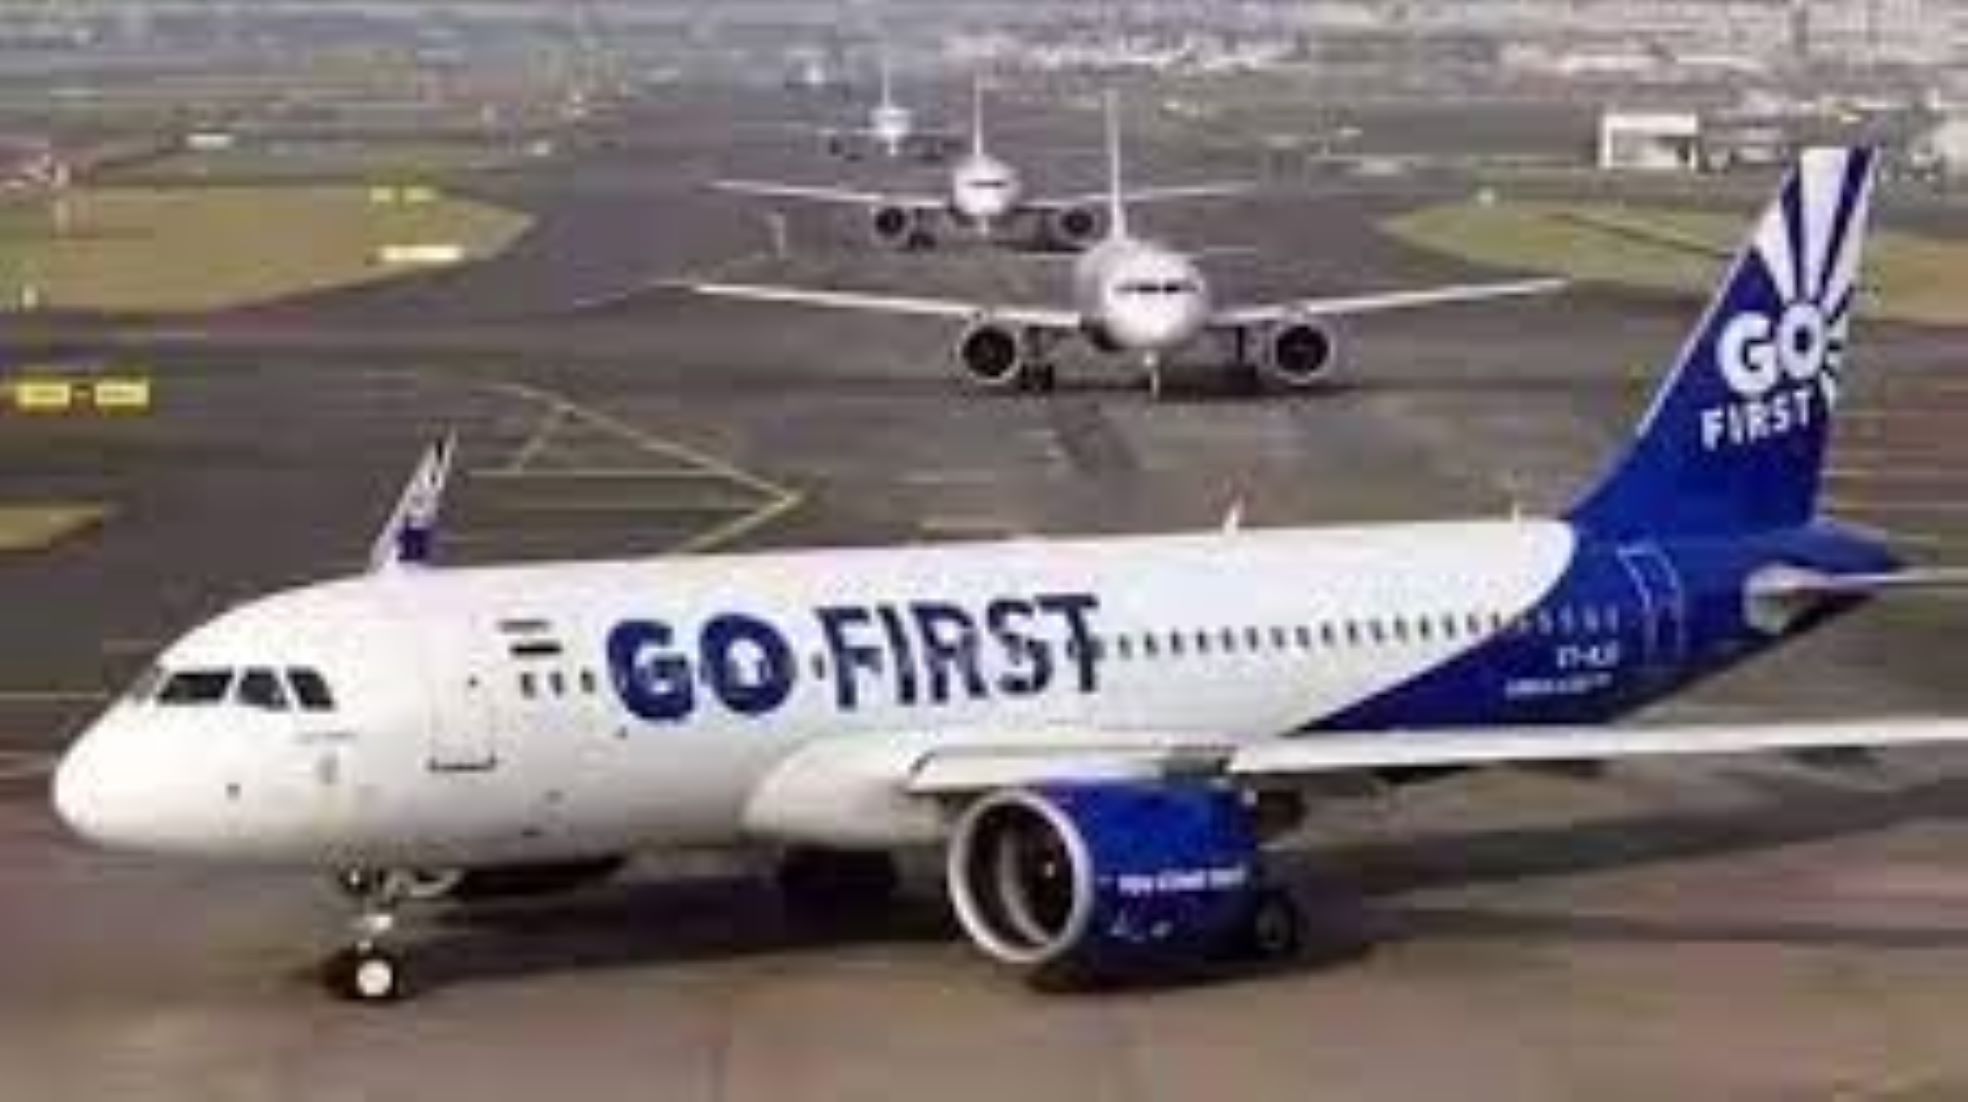 India’s Crisis-Hit Private Airline, Go First, Cancels All Flight Bookings Until Mid-May